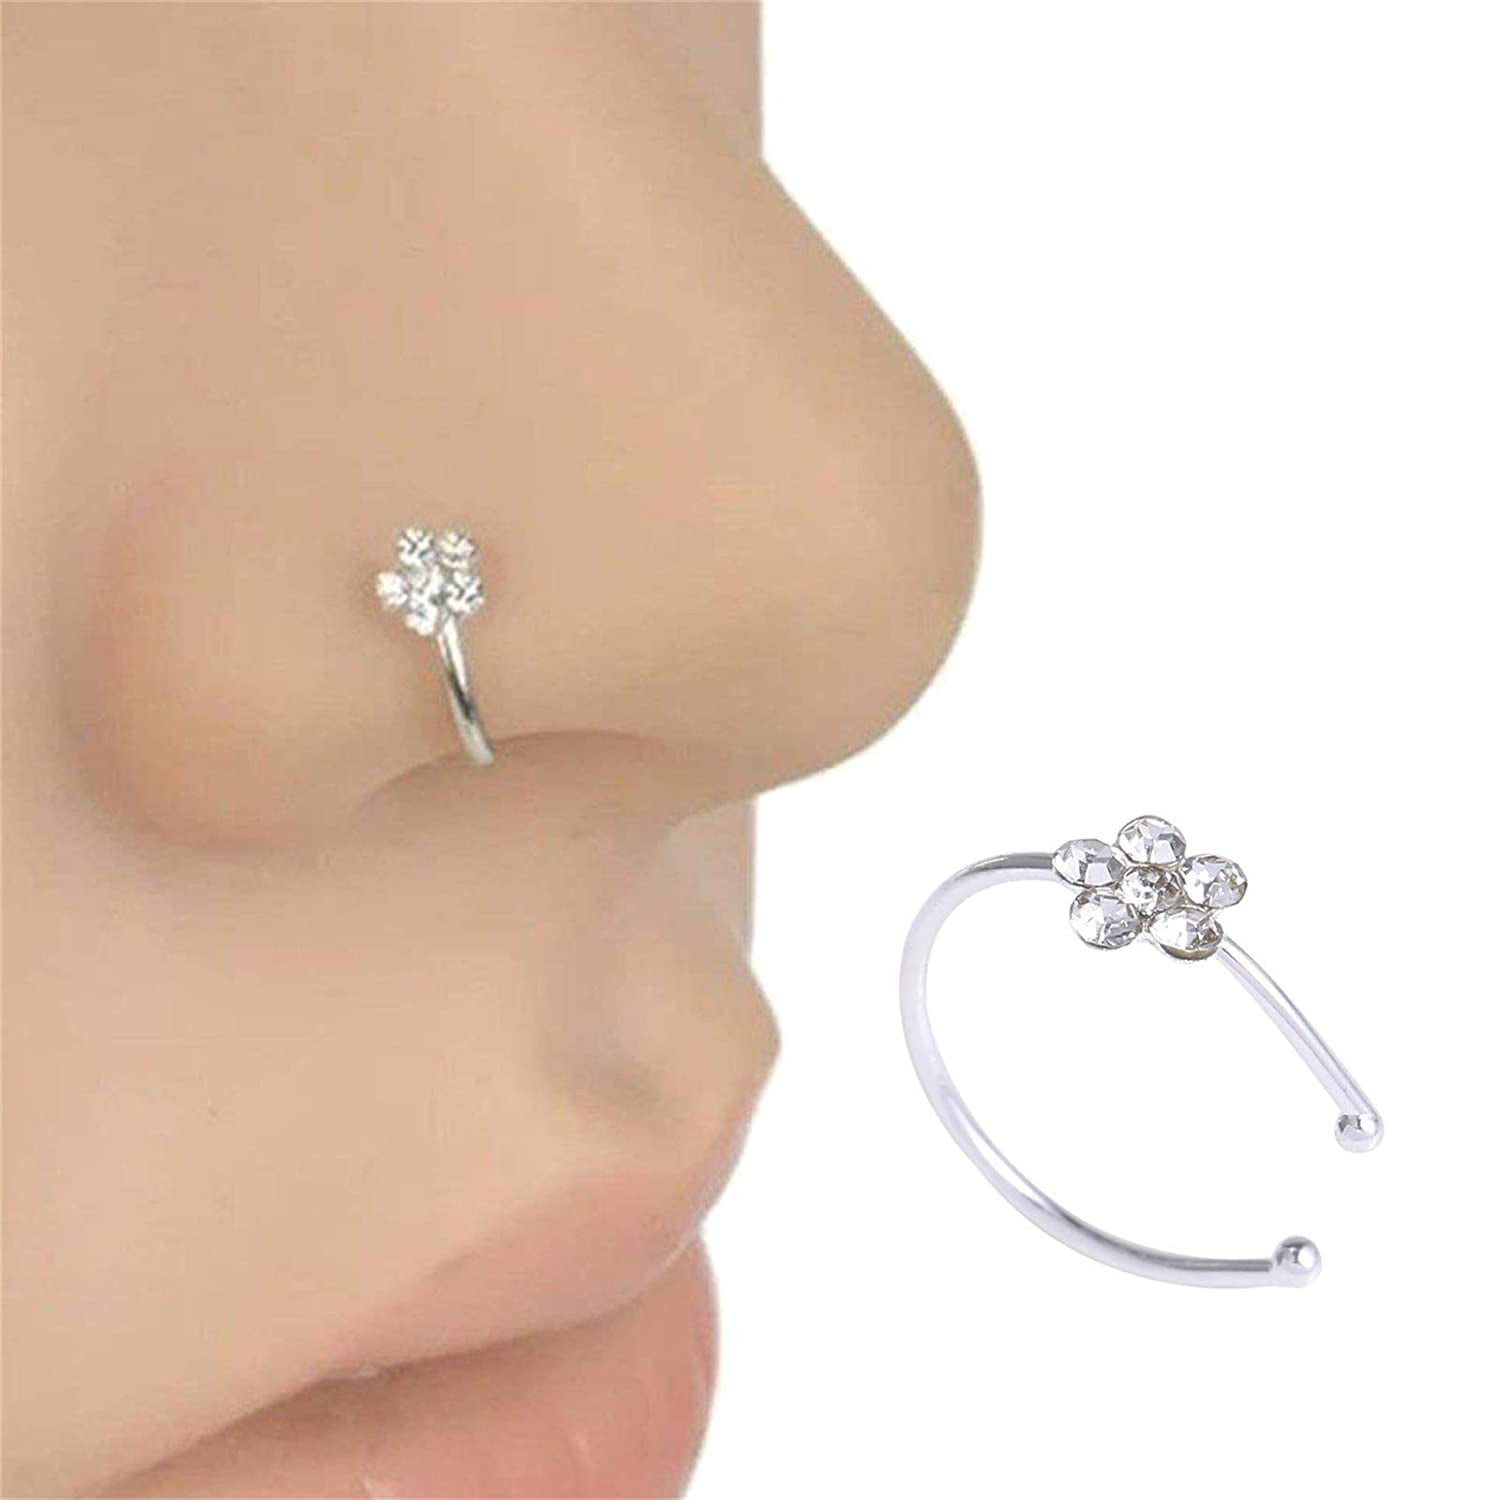 parkere Regnskab fugtighed Small Thin Diamond Flower Crystal Nose Ring Stud Hoop-Sparkly Crystal Nose  Ring Gifts for Women - Walmart.com